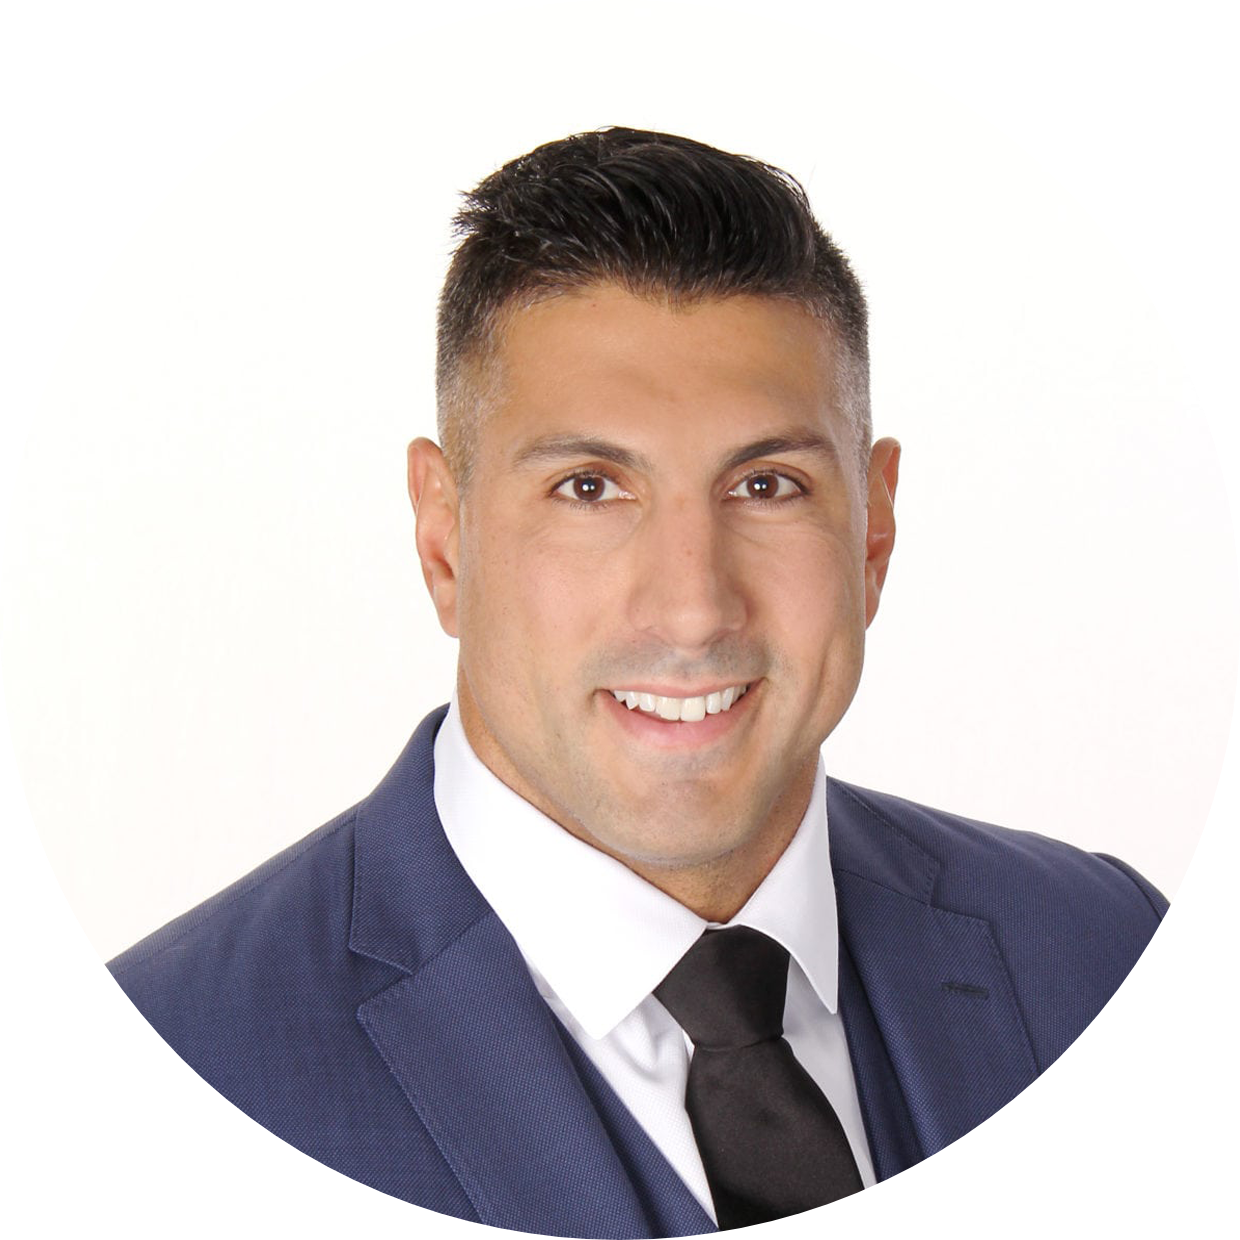 Jason Babin, owner of RedZone Realty Group and former NFL player discusses his Jacksonville based company and his real estate journey. 